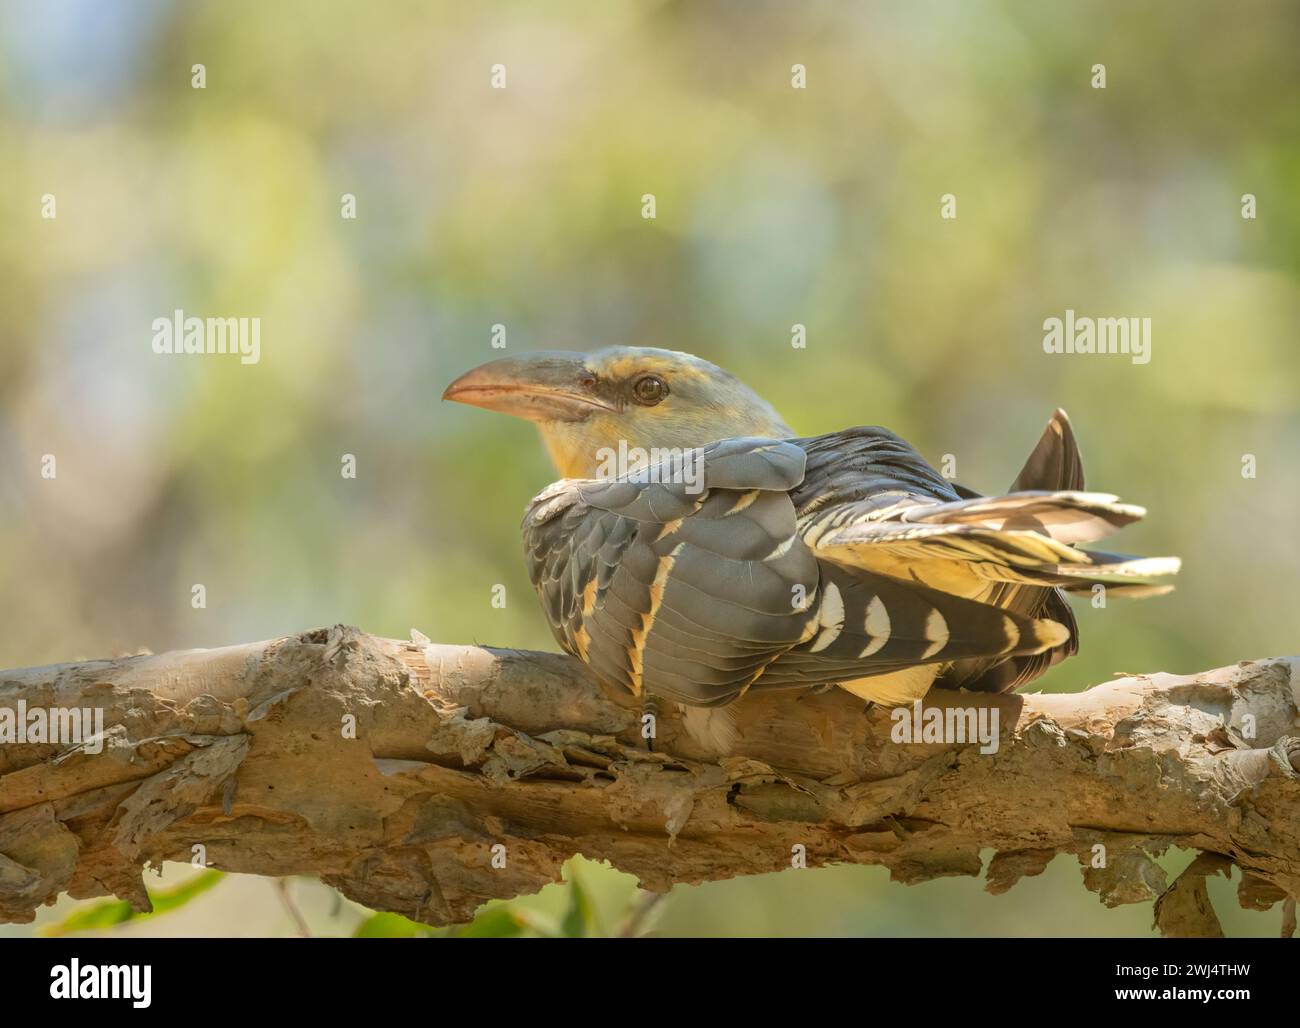 Channel-billed Cuckoo (Scythrops novaehollandiae) resting on a branch of a paper bark tree and is the largest species of cuckoo found in Australia. Stock Photo